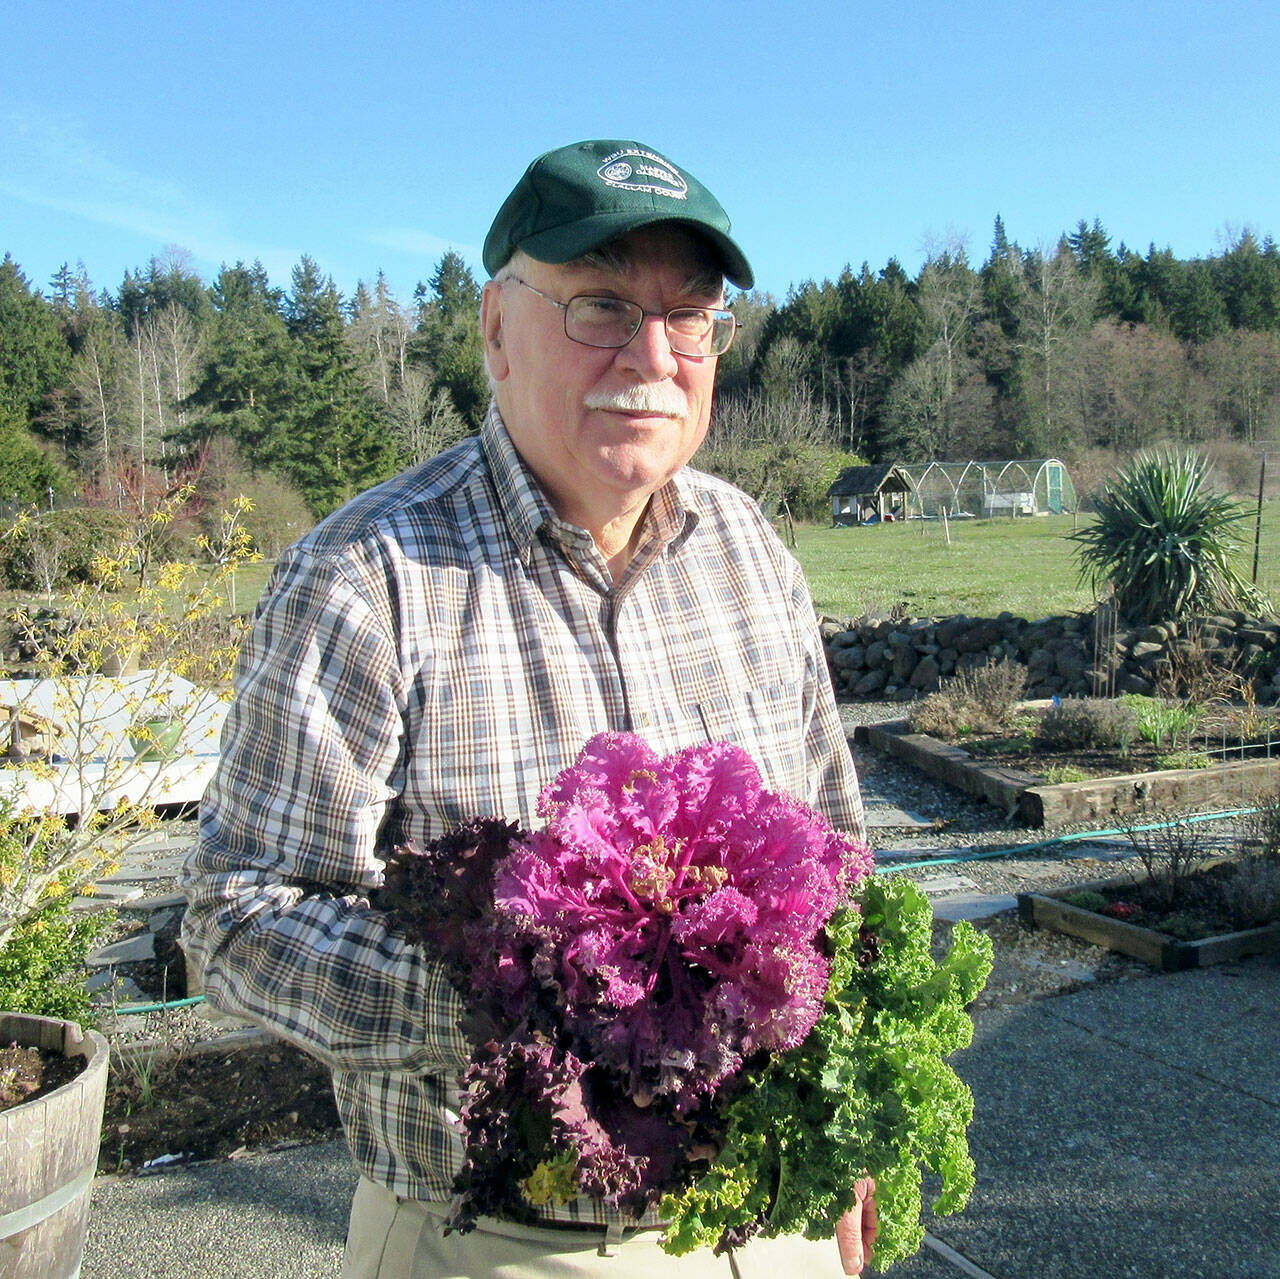 Photo courtesy of Bob Cain
Find out how to keep your fruit trees fit by using horticultural oils from Clallam County Master Gardener Bob Cain, the presenter at the next Green Thumb Education Series set for Jan. 25 in Port Angeles and on Zoom.